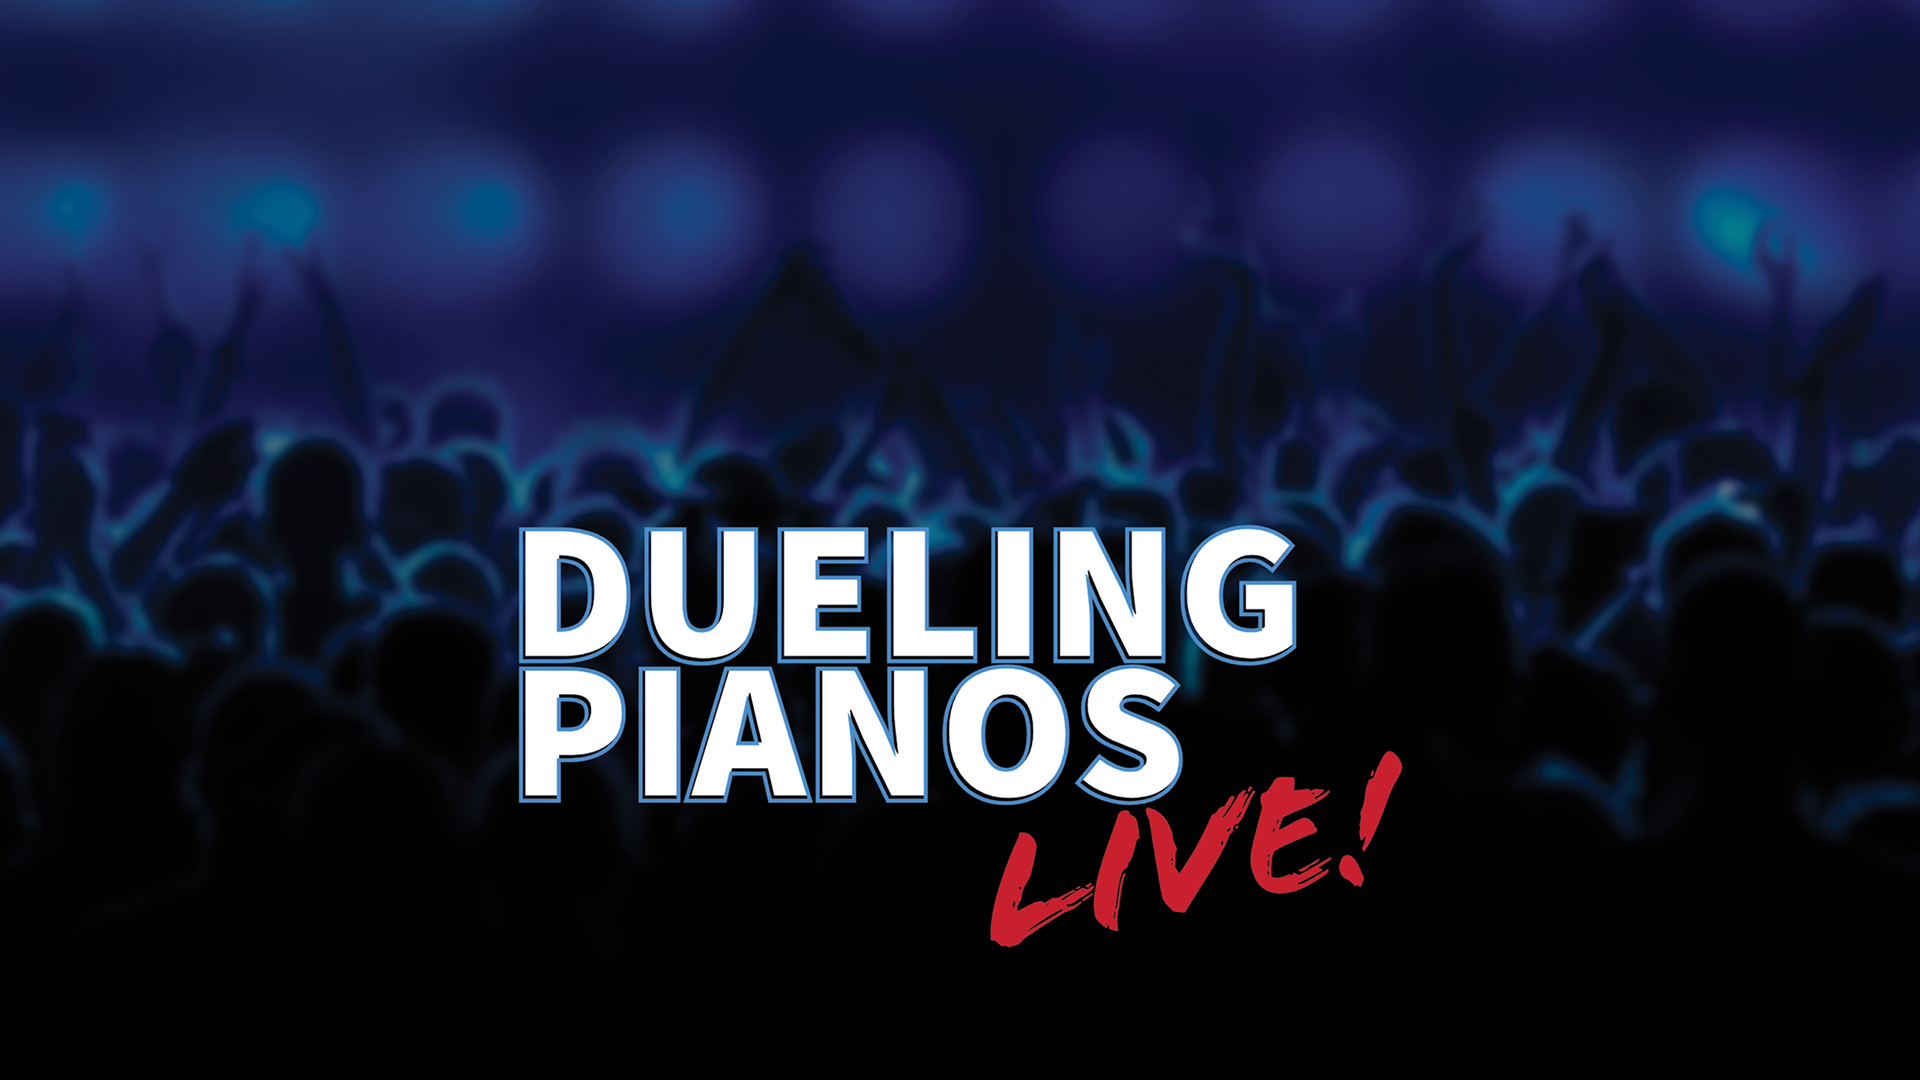 Dueling Pianos Live! at The Brook Casino in Seabrook February 11th, Seabrook, New Hampshire, United States